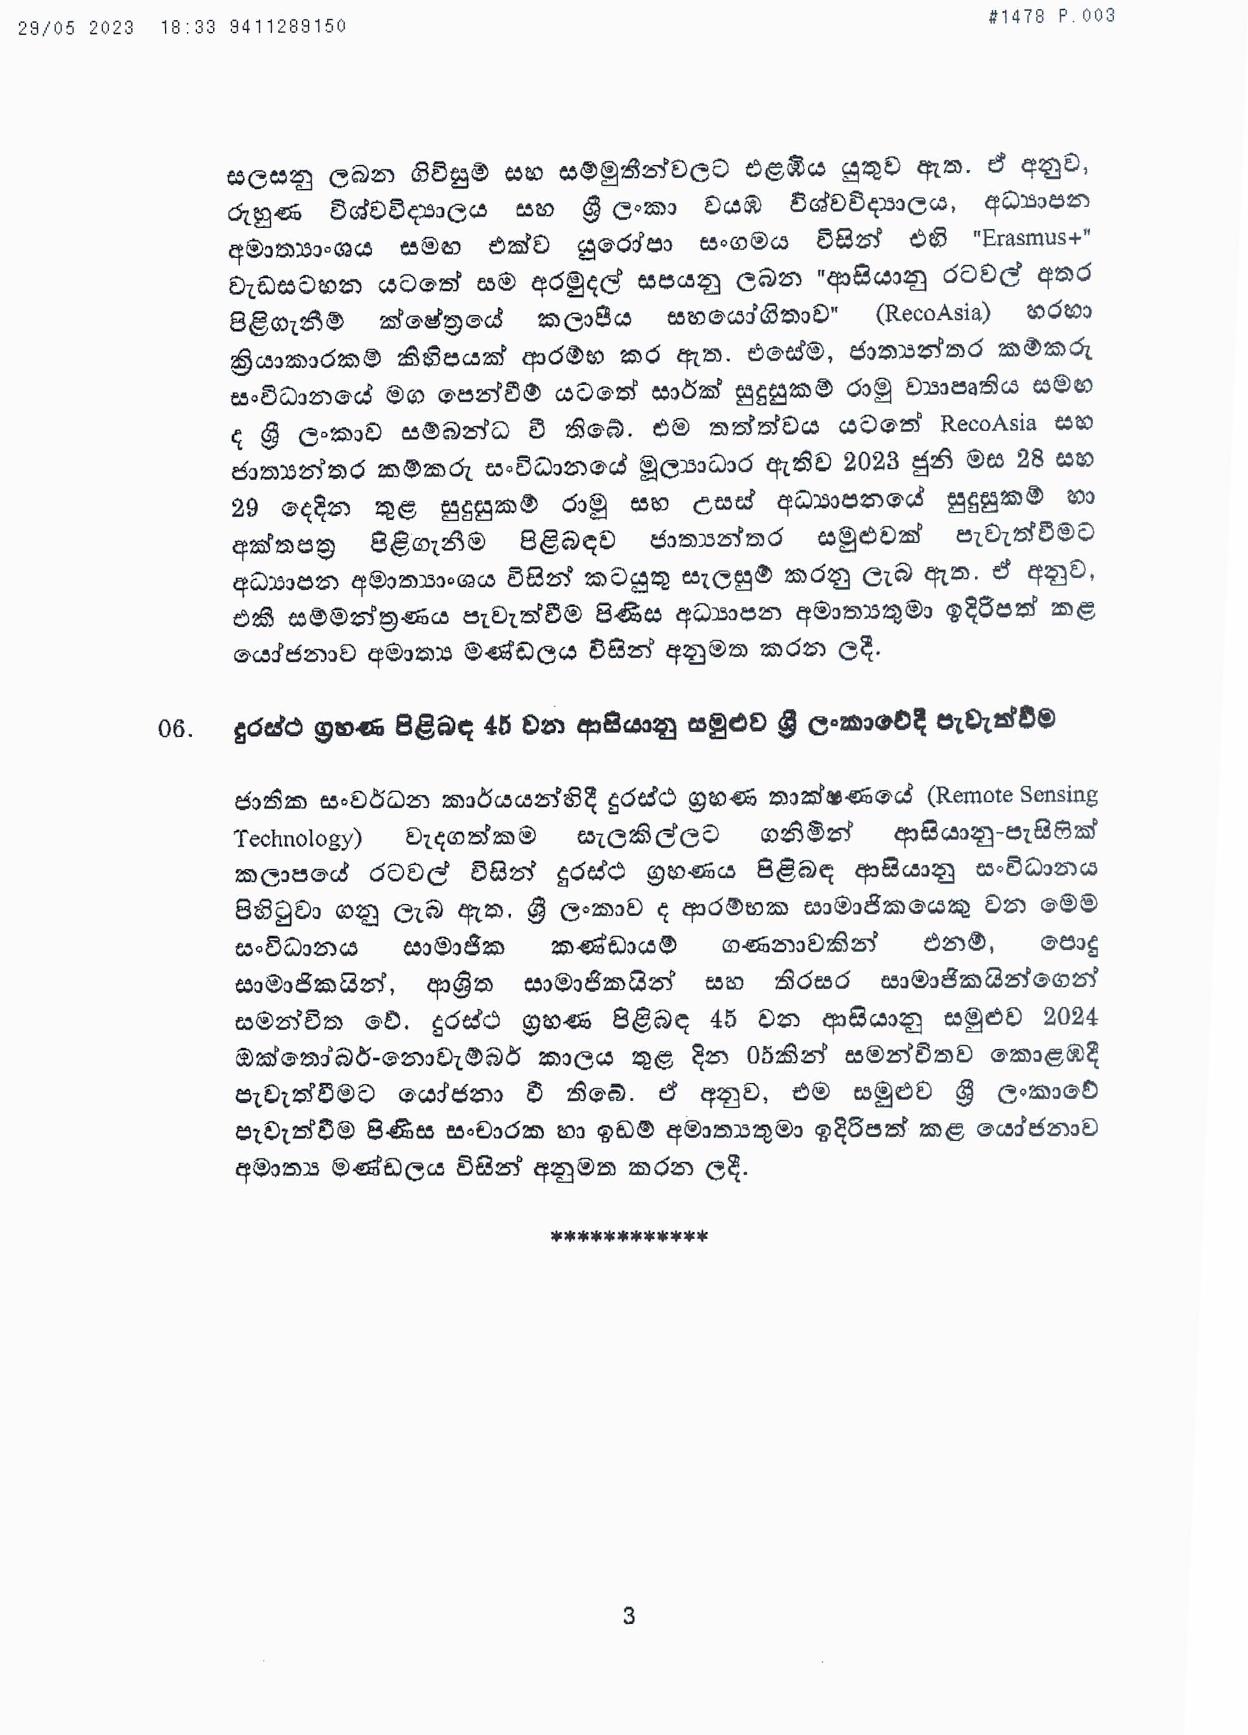 Cabinet Decisions on 29.05.2023 page 003